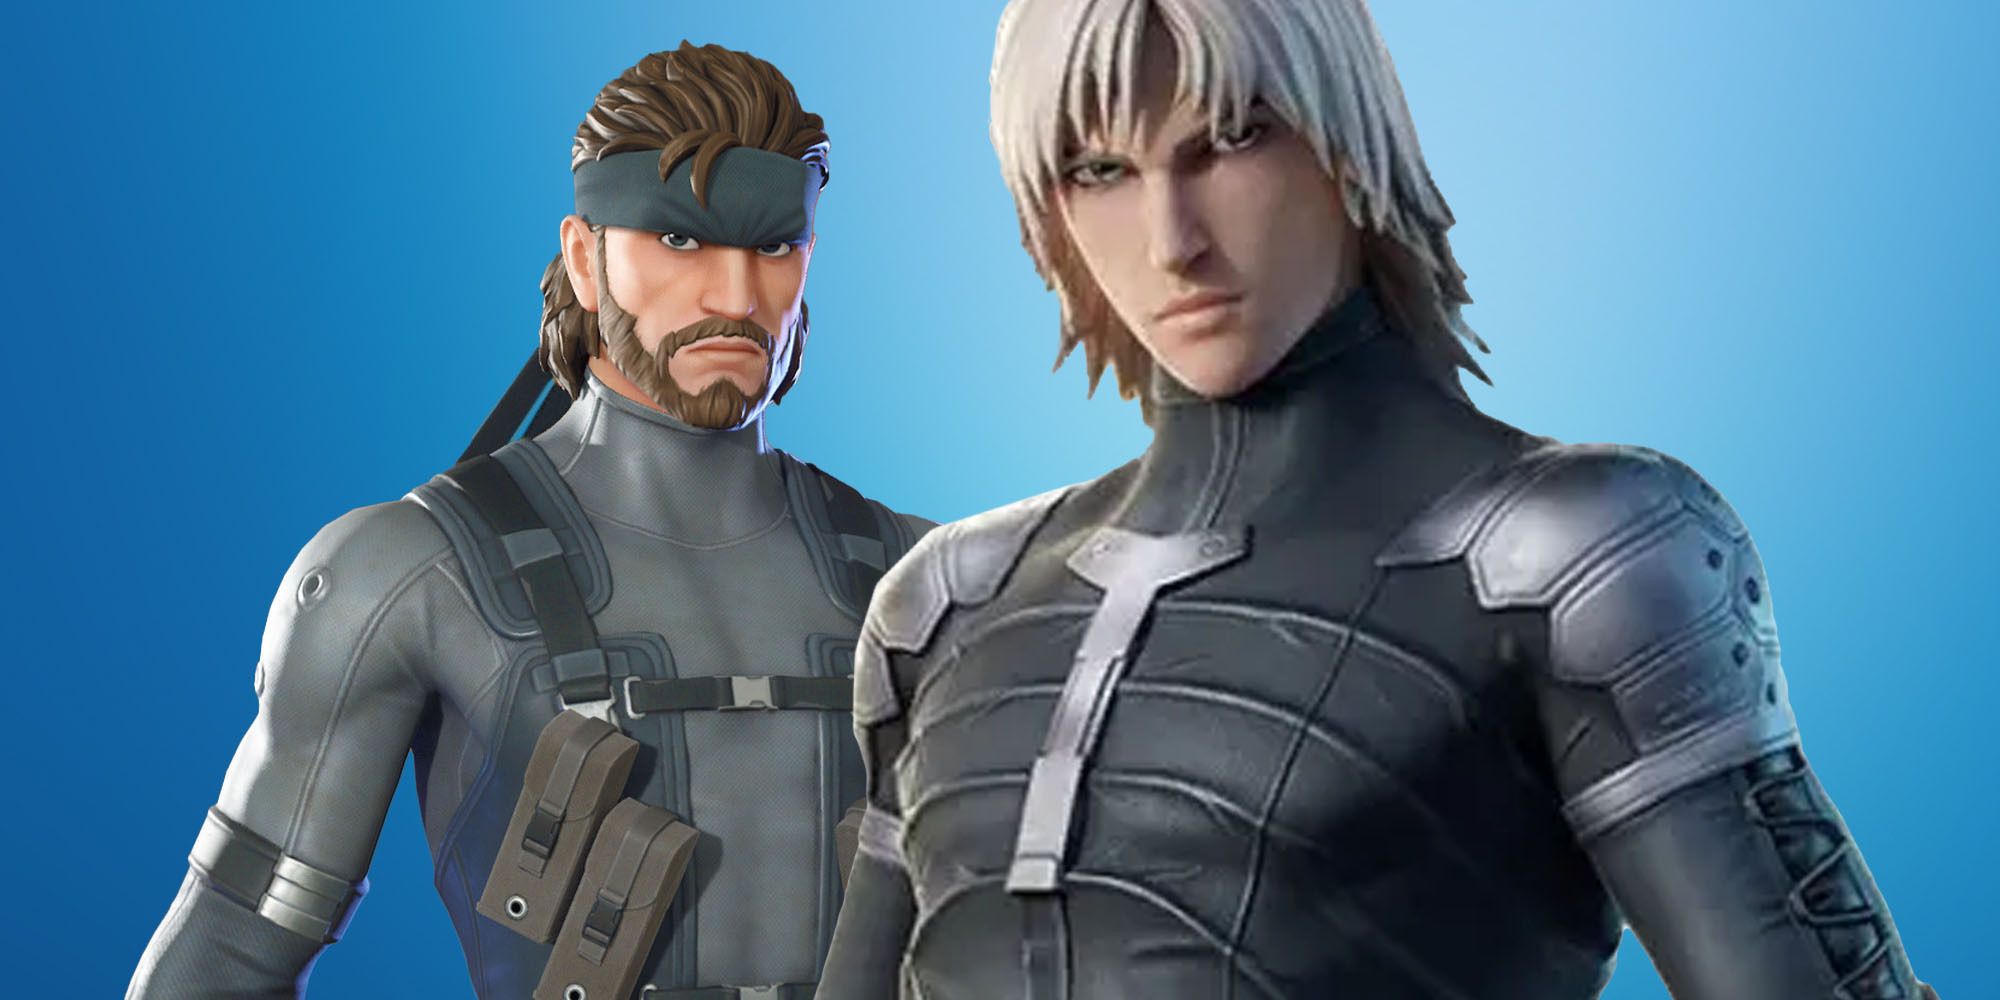 Solid Snake and Raiden as Fortnite skins